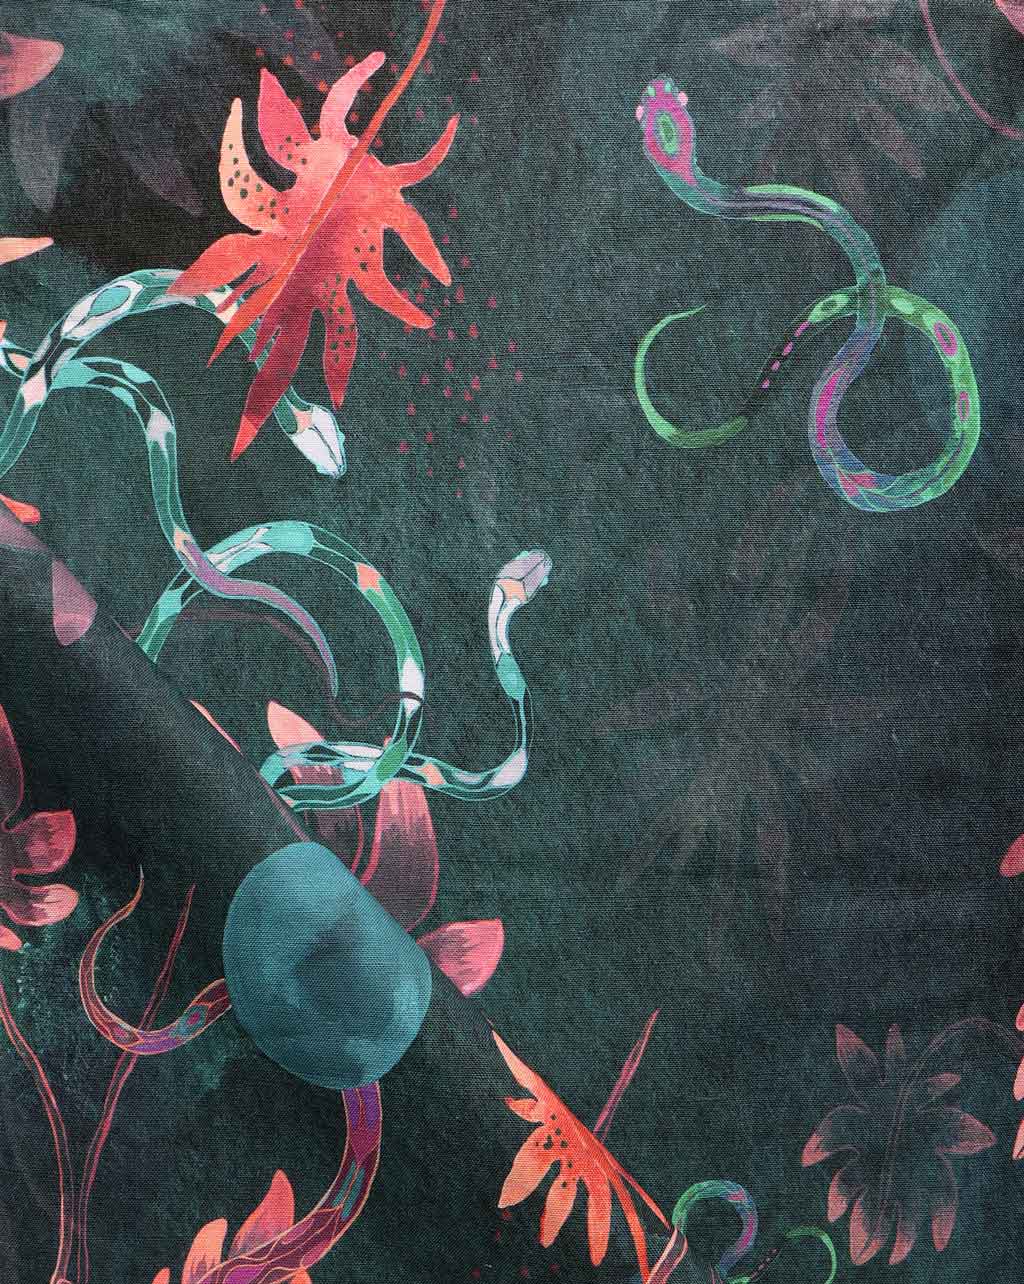 The Edera Fabric 12 Yards Beryl features a chinoiserie-inspired design with colorful snakes and flowers on it